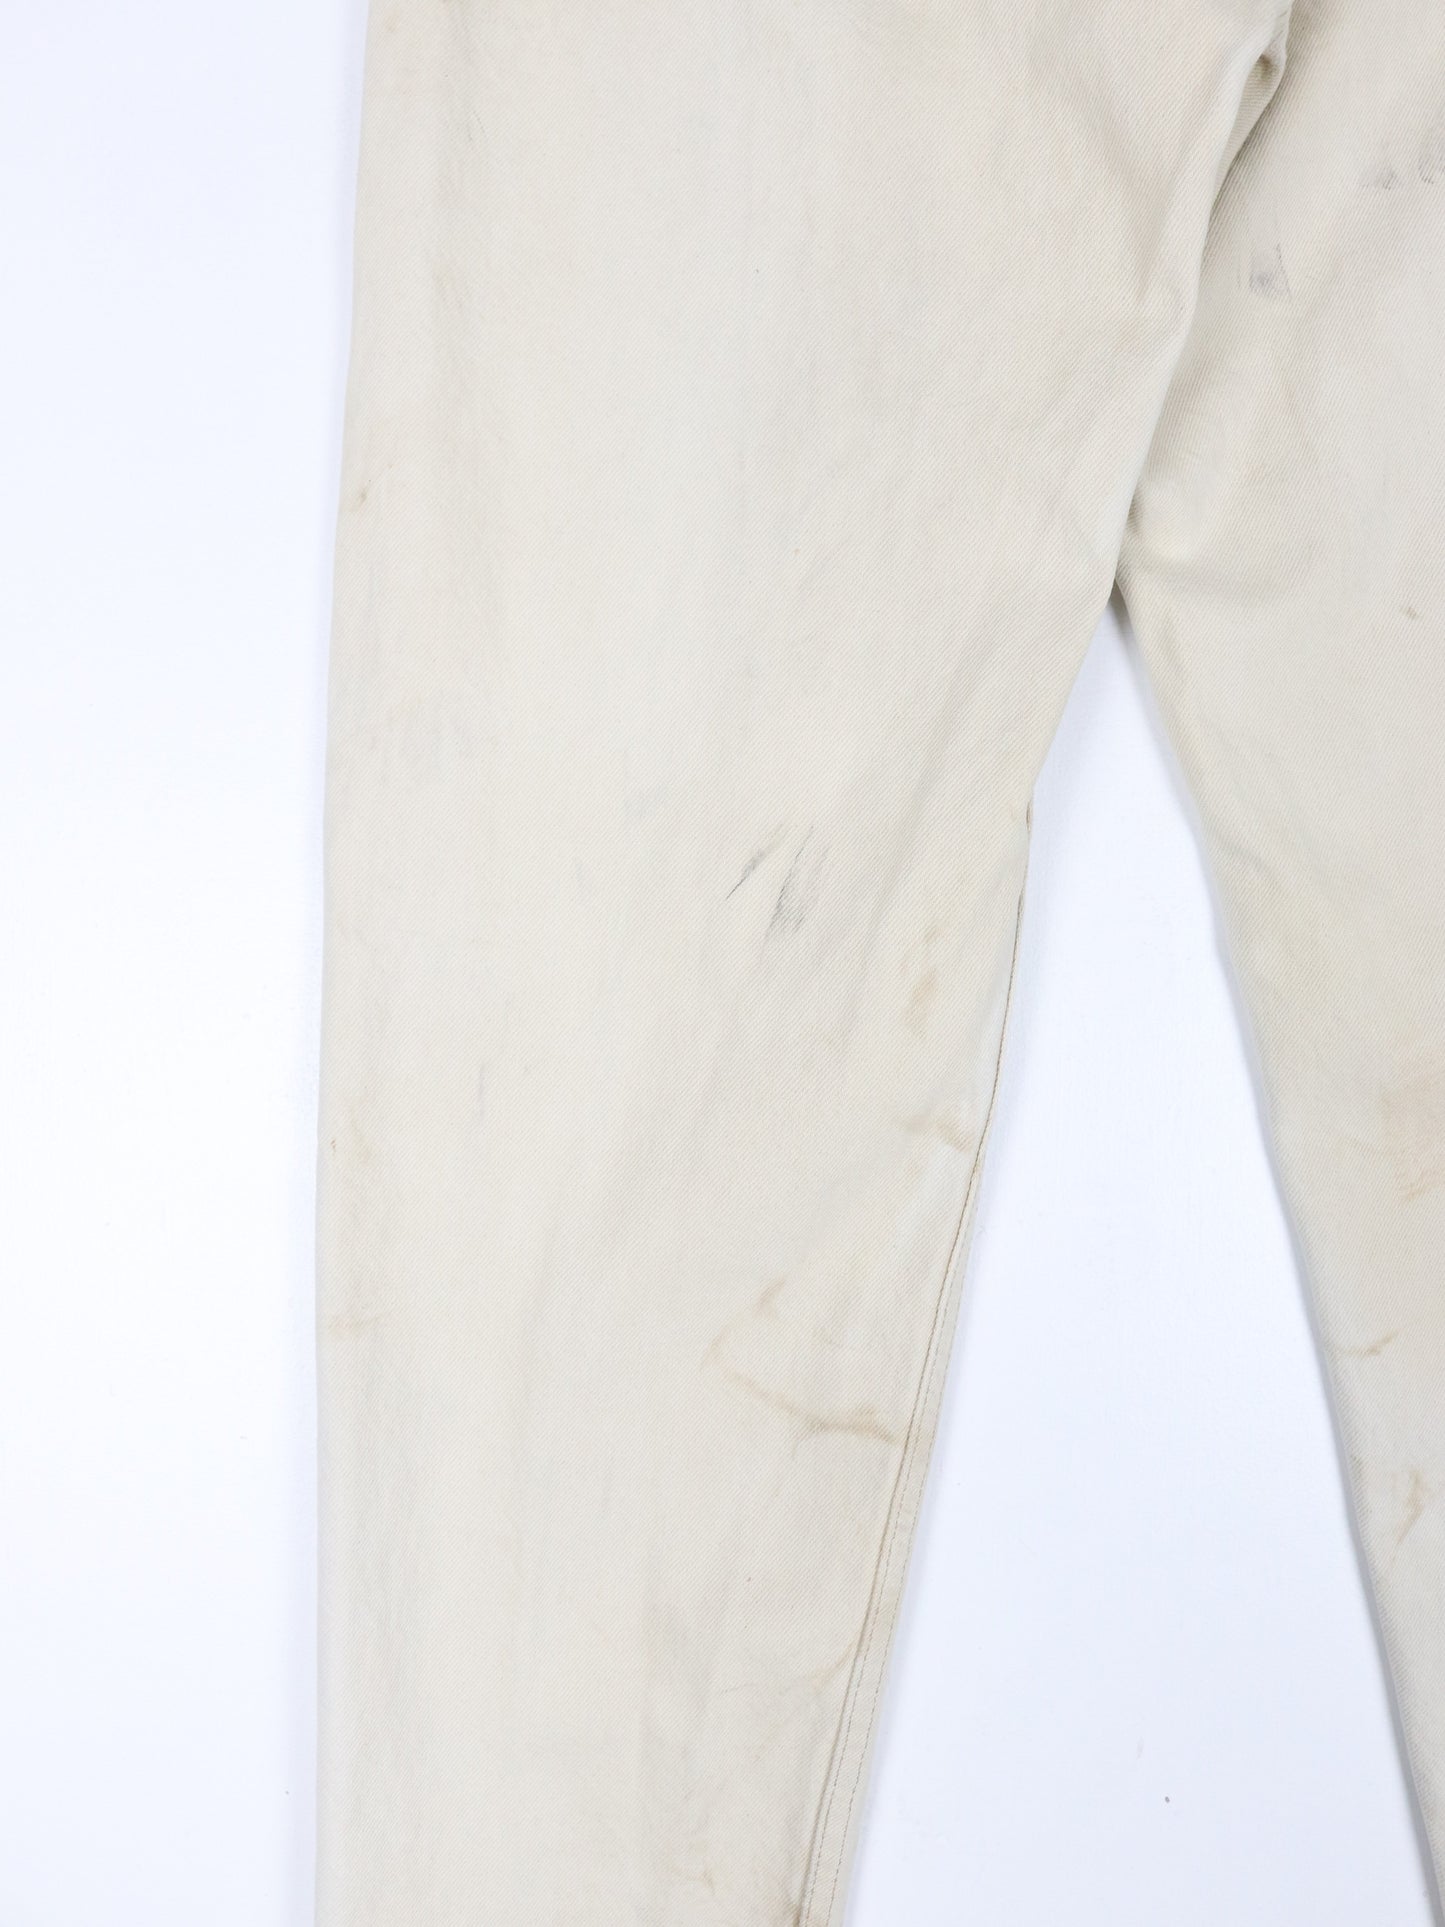 Vintage Levi's Pants Fits Mens 30 x 34 Beige Denim Jeans 550 Relaxed Tapered